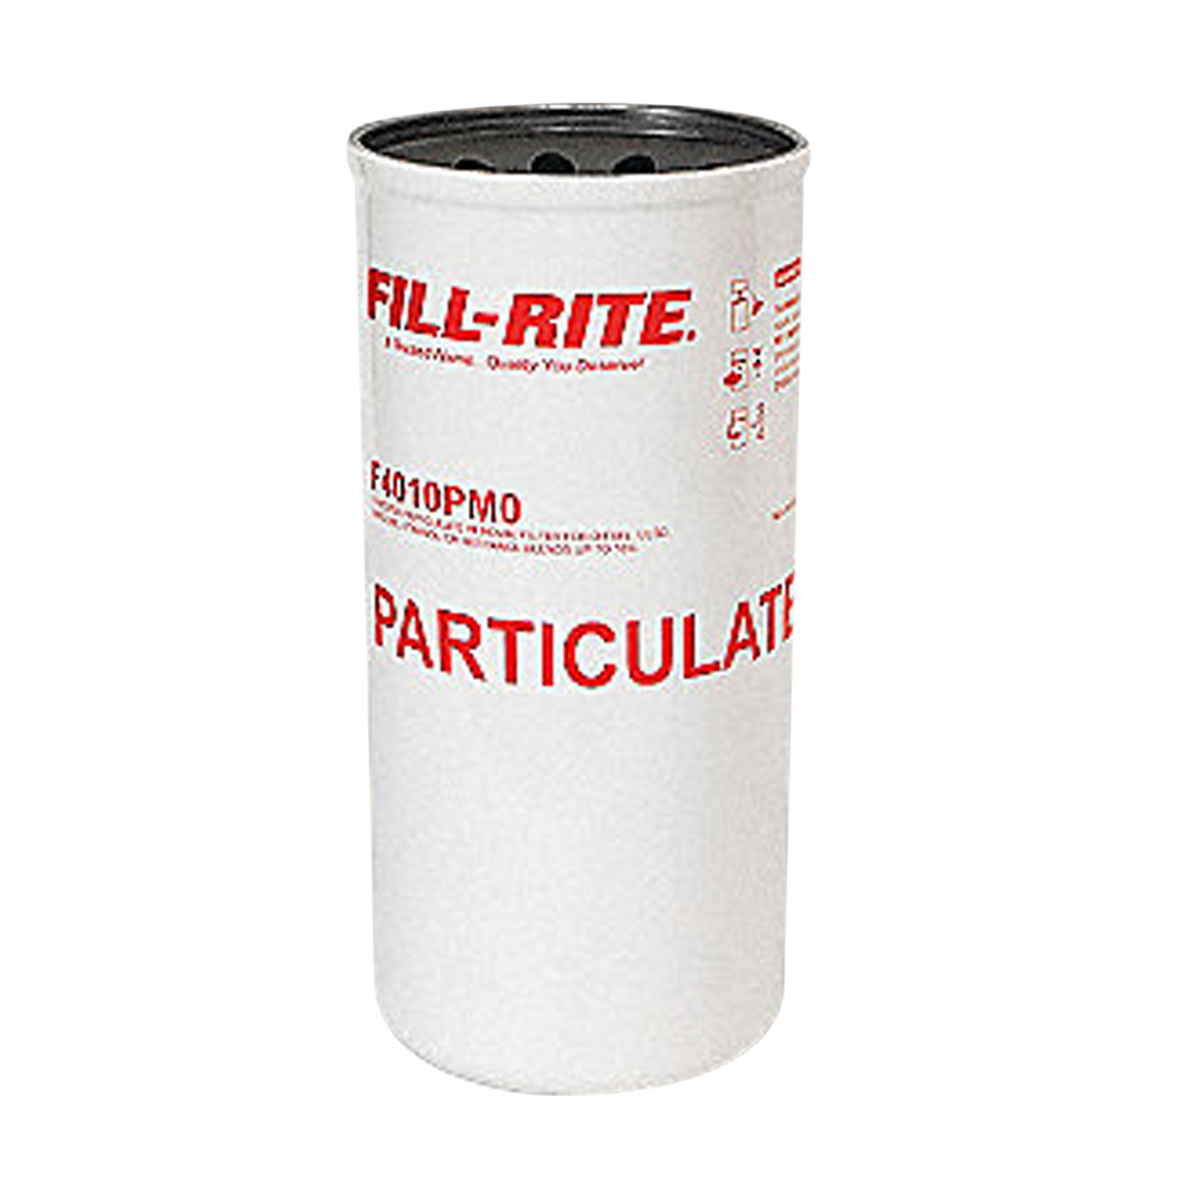 40 GPM Particulate Spin on Filter - 10 Micron